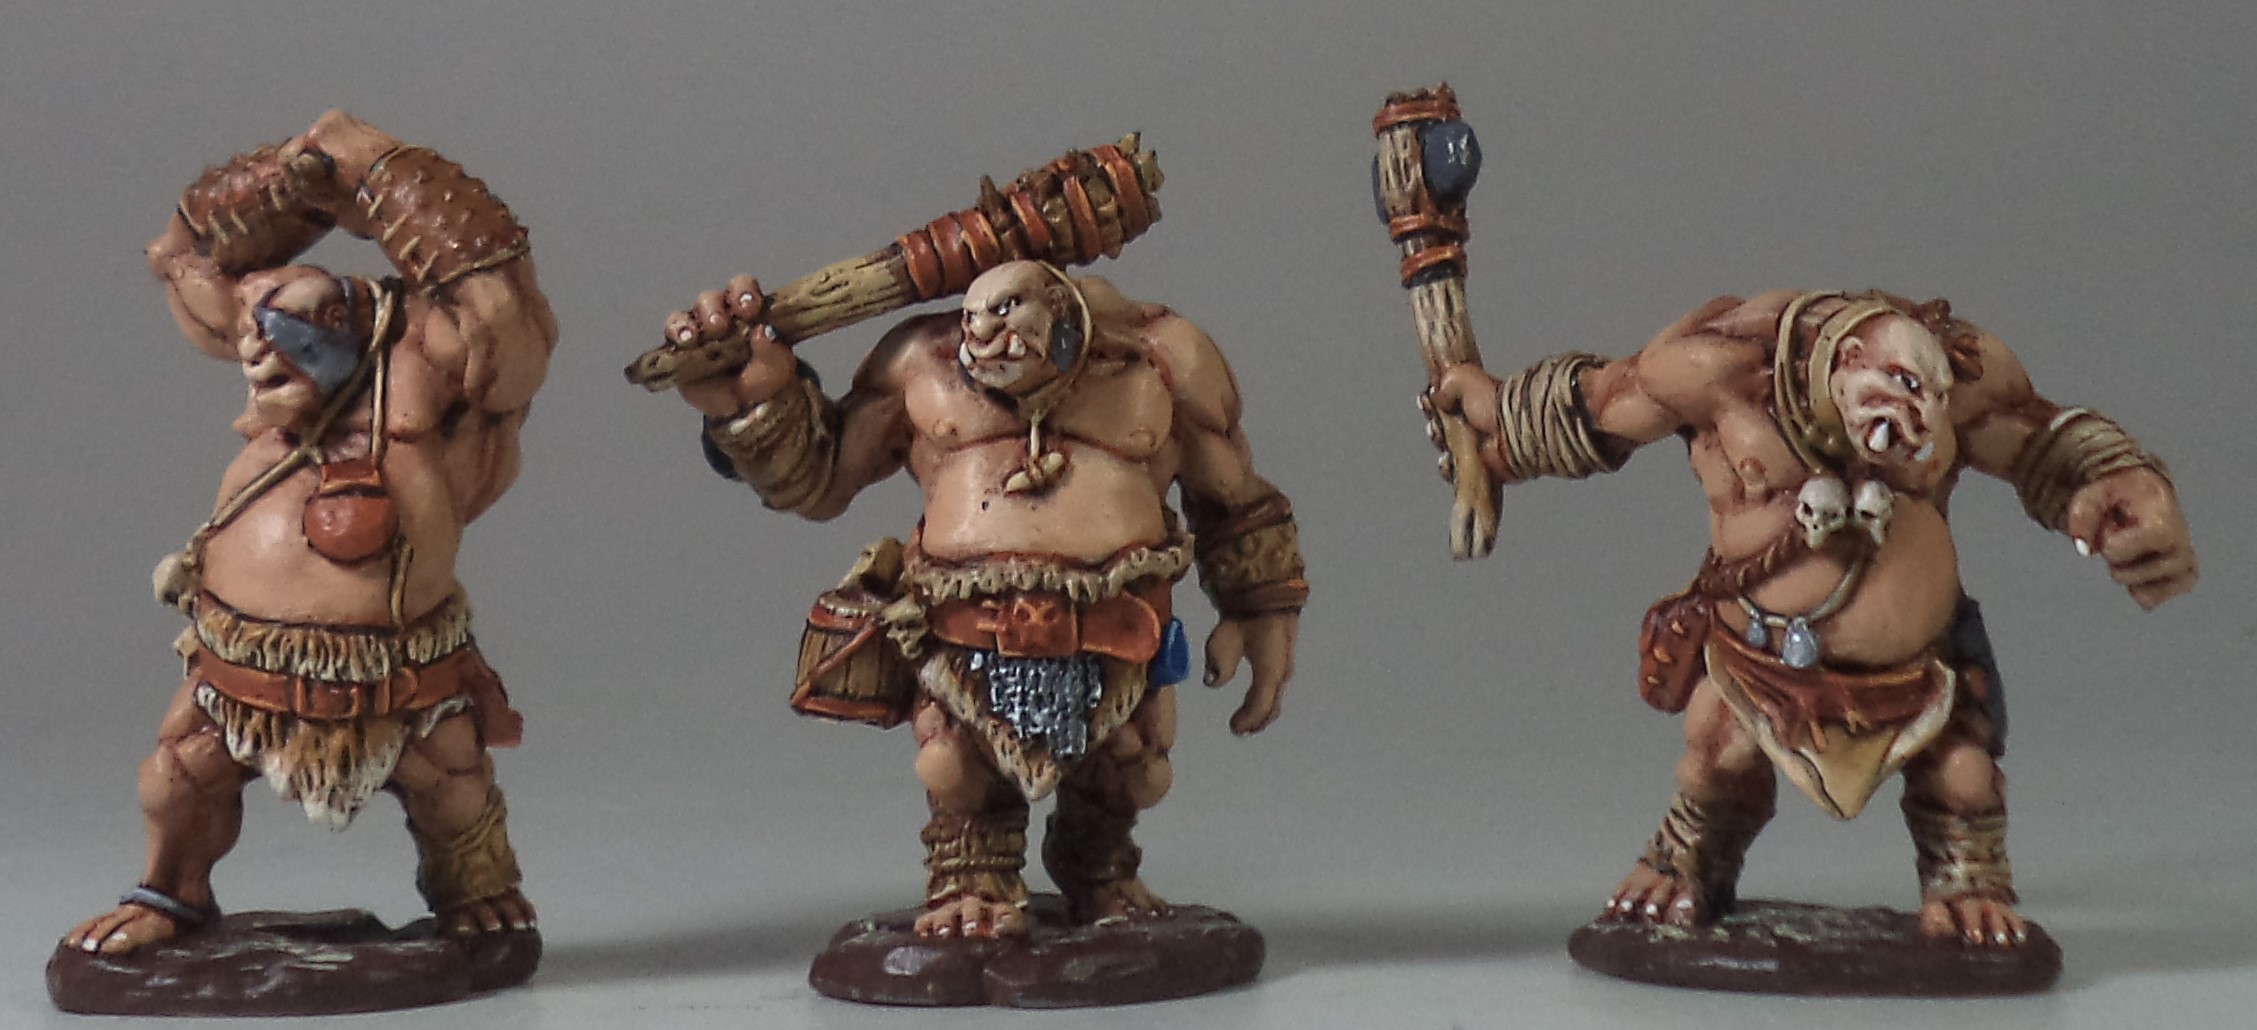 Paintedfigs Reaper and D&D Miniature Painting Gallery — Paintedfigs  Miniature Painting Service